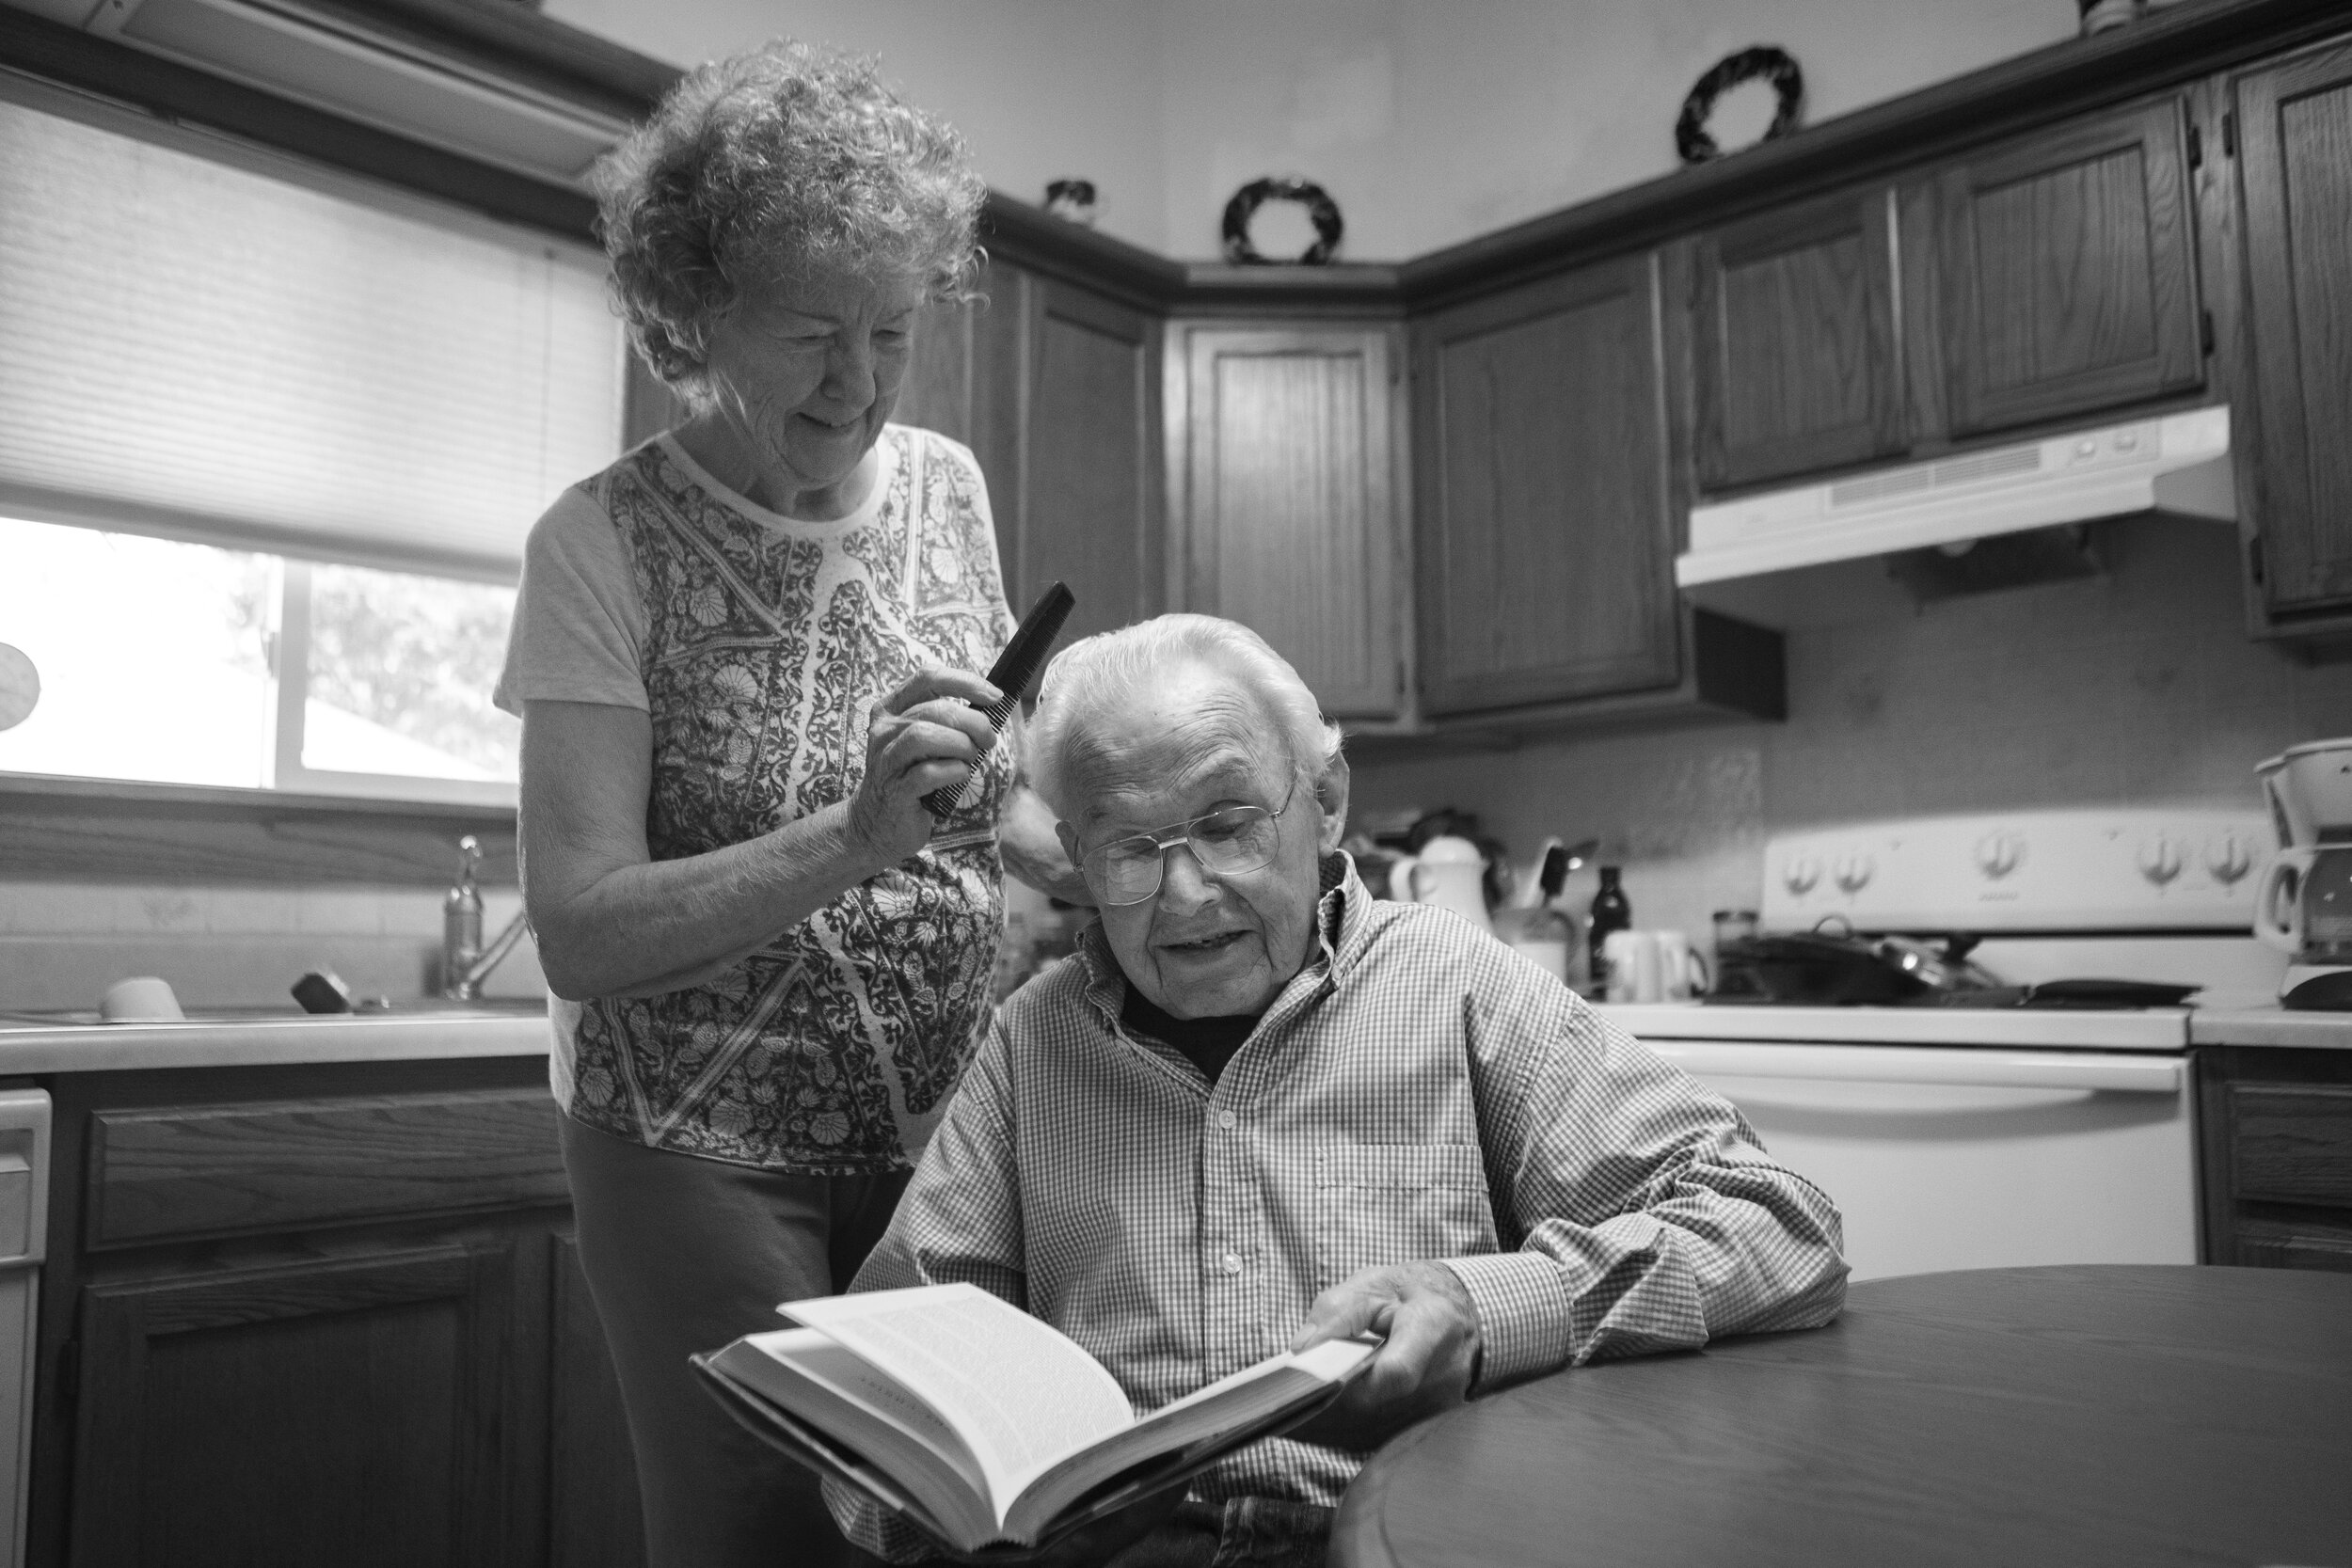  Jean Krejci (left) combs the hair of her husband John Krejci, in their kitchen while he reads a book at their Lincoln home on Monday, August 24, 2020.  Krejci previously served as a priest and later married a Jean who was a nun. Both have spent thei